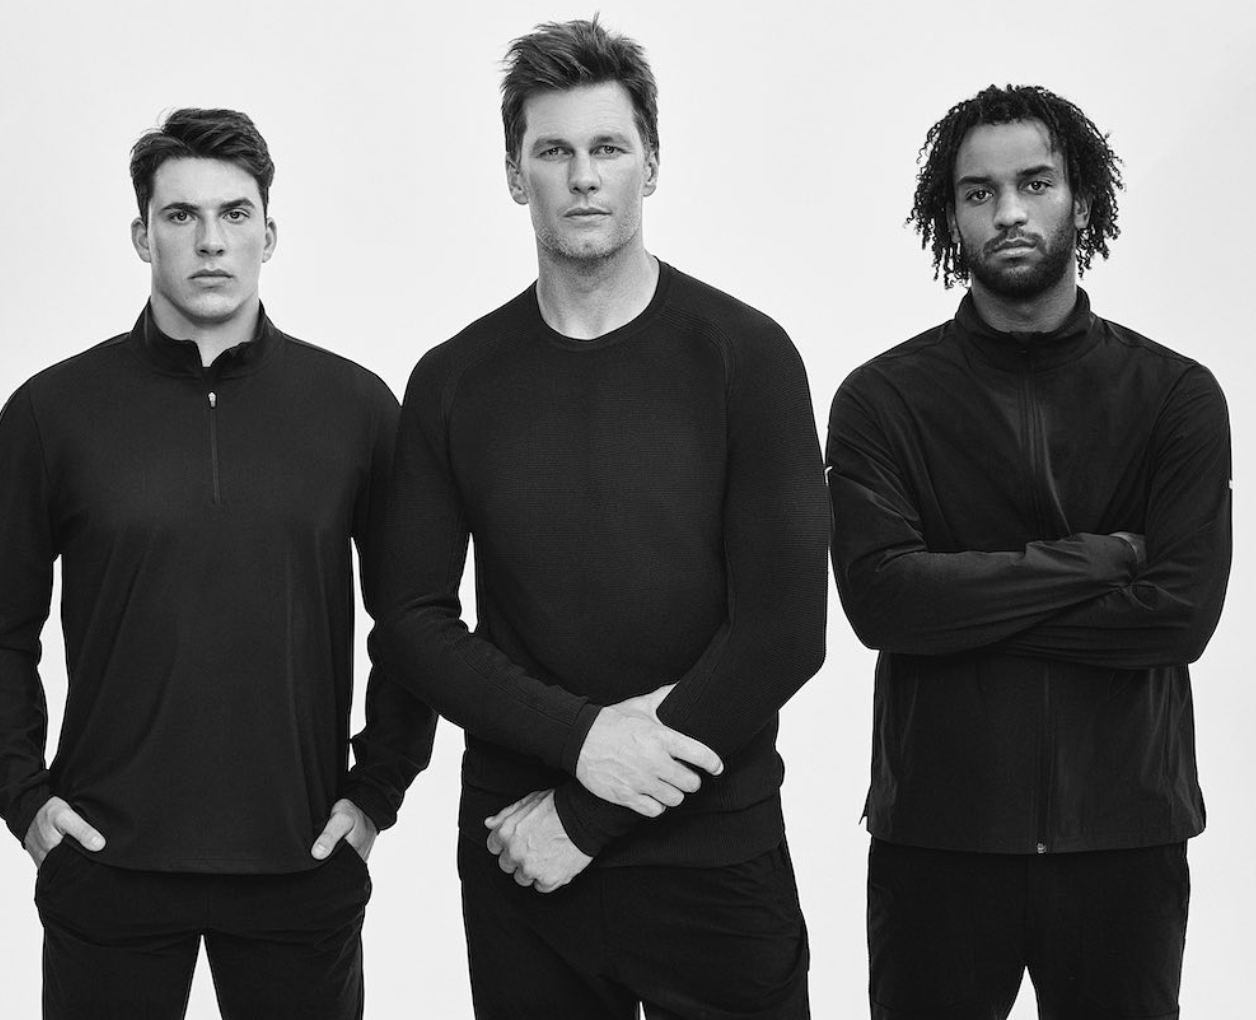 Tom Brady's new clothing line launches Jan. 12